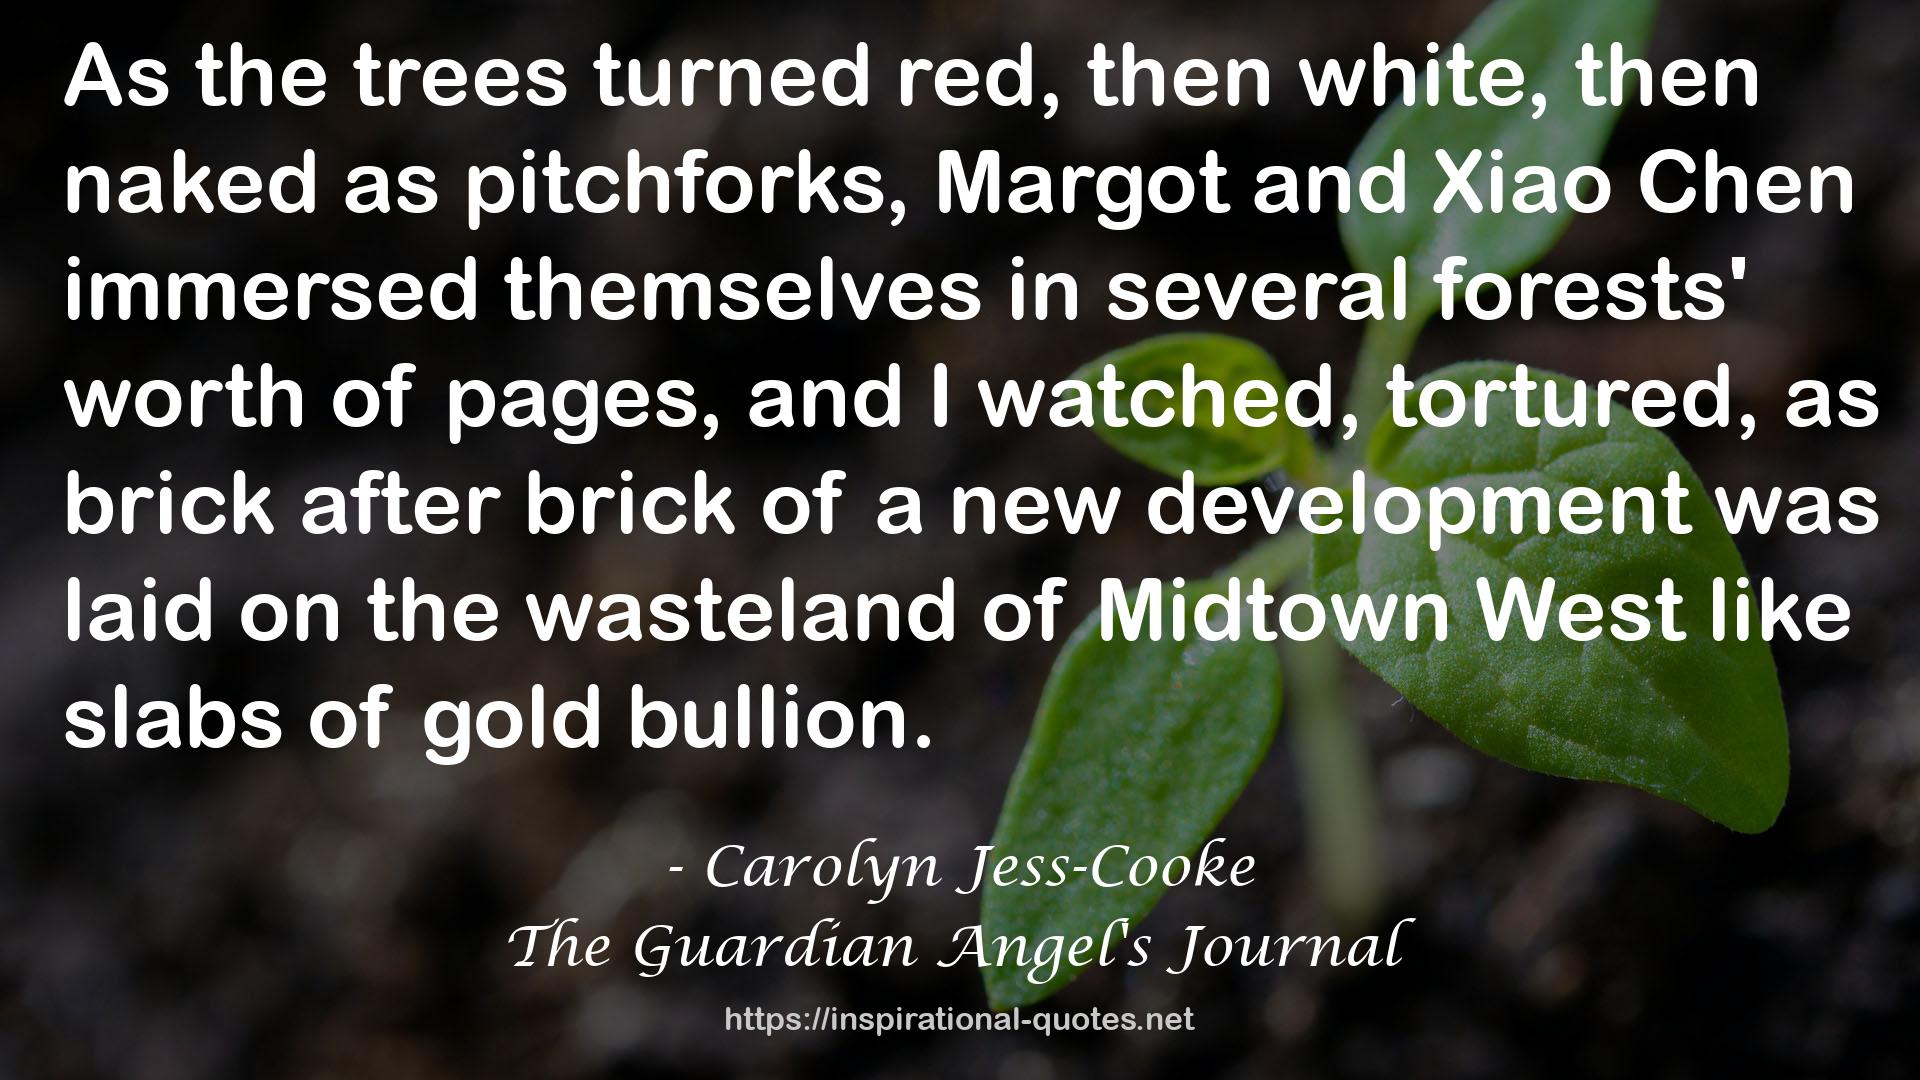 The Guardian Angel's Journal QUOTES